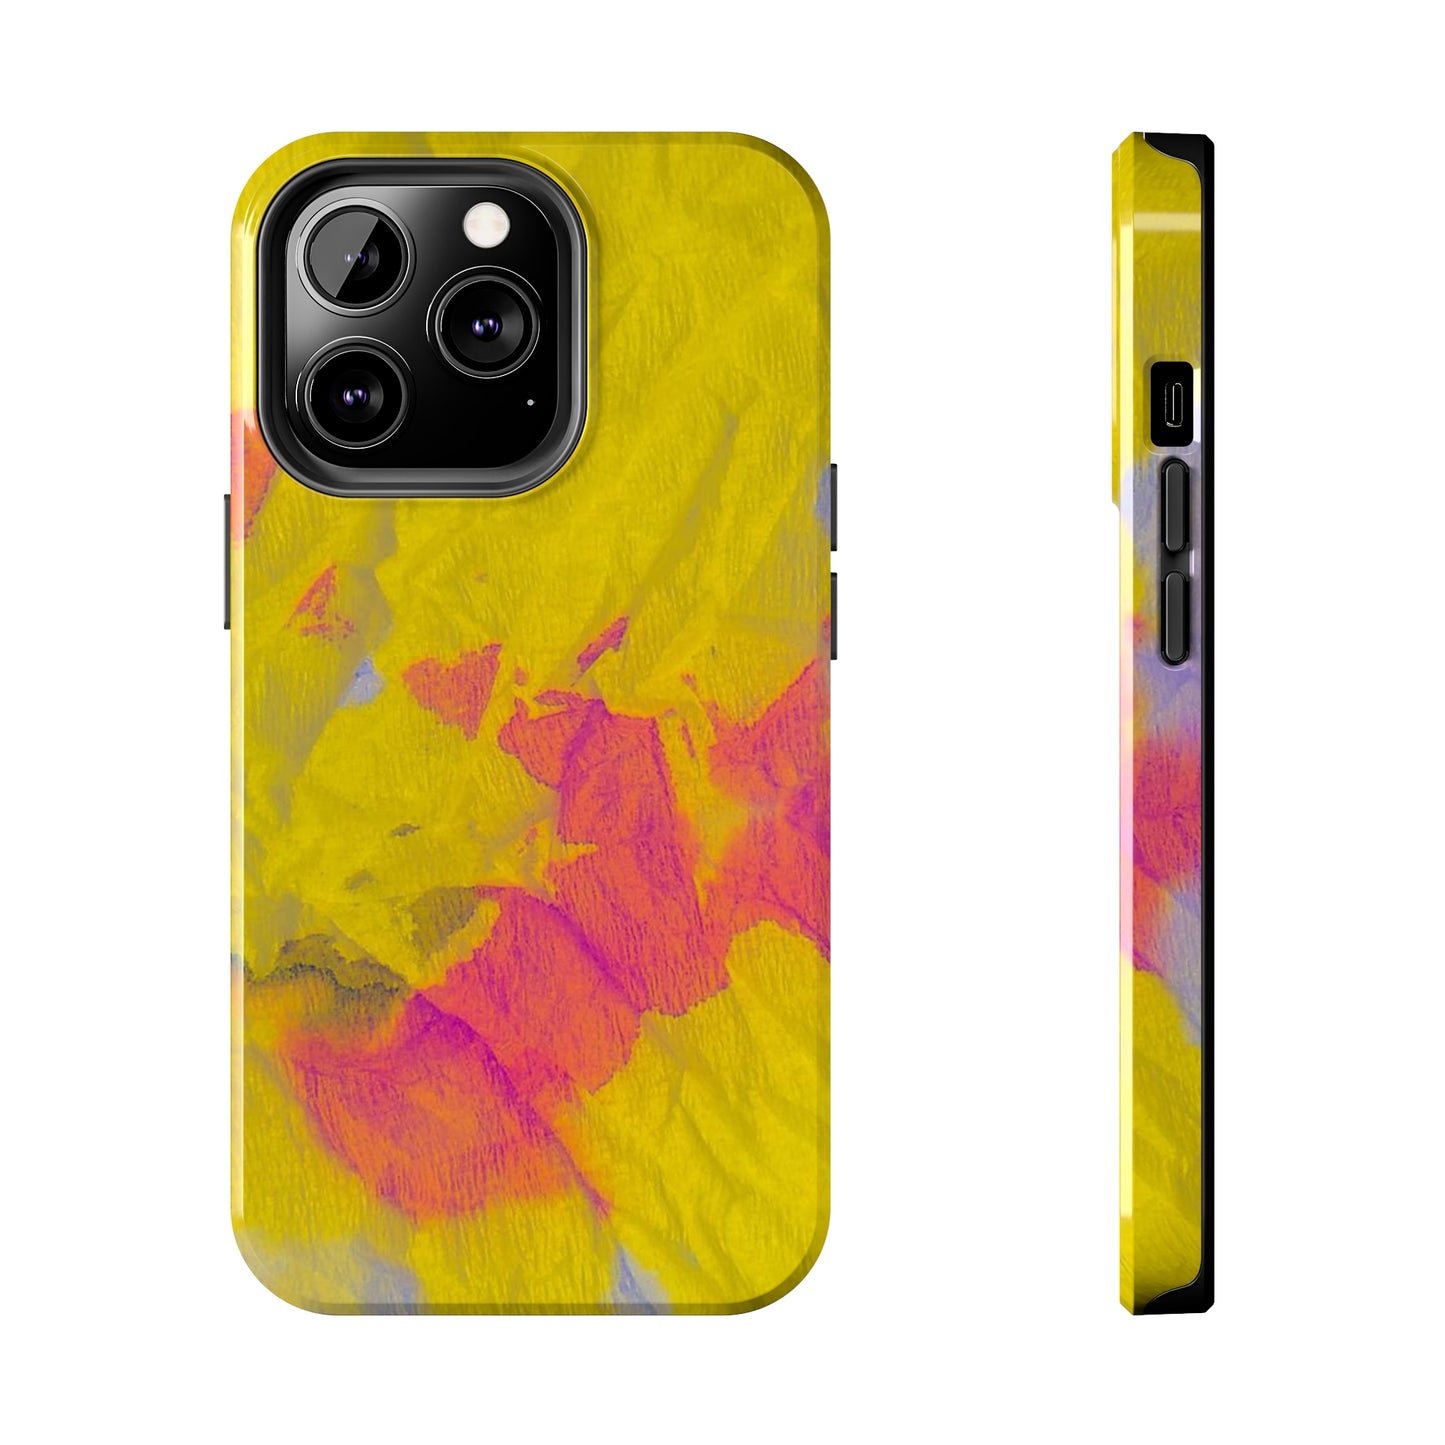 Rainbow Watercolor Only / iPhone Case